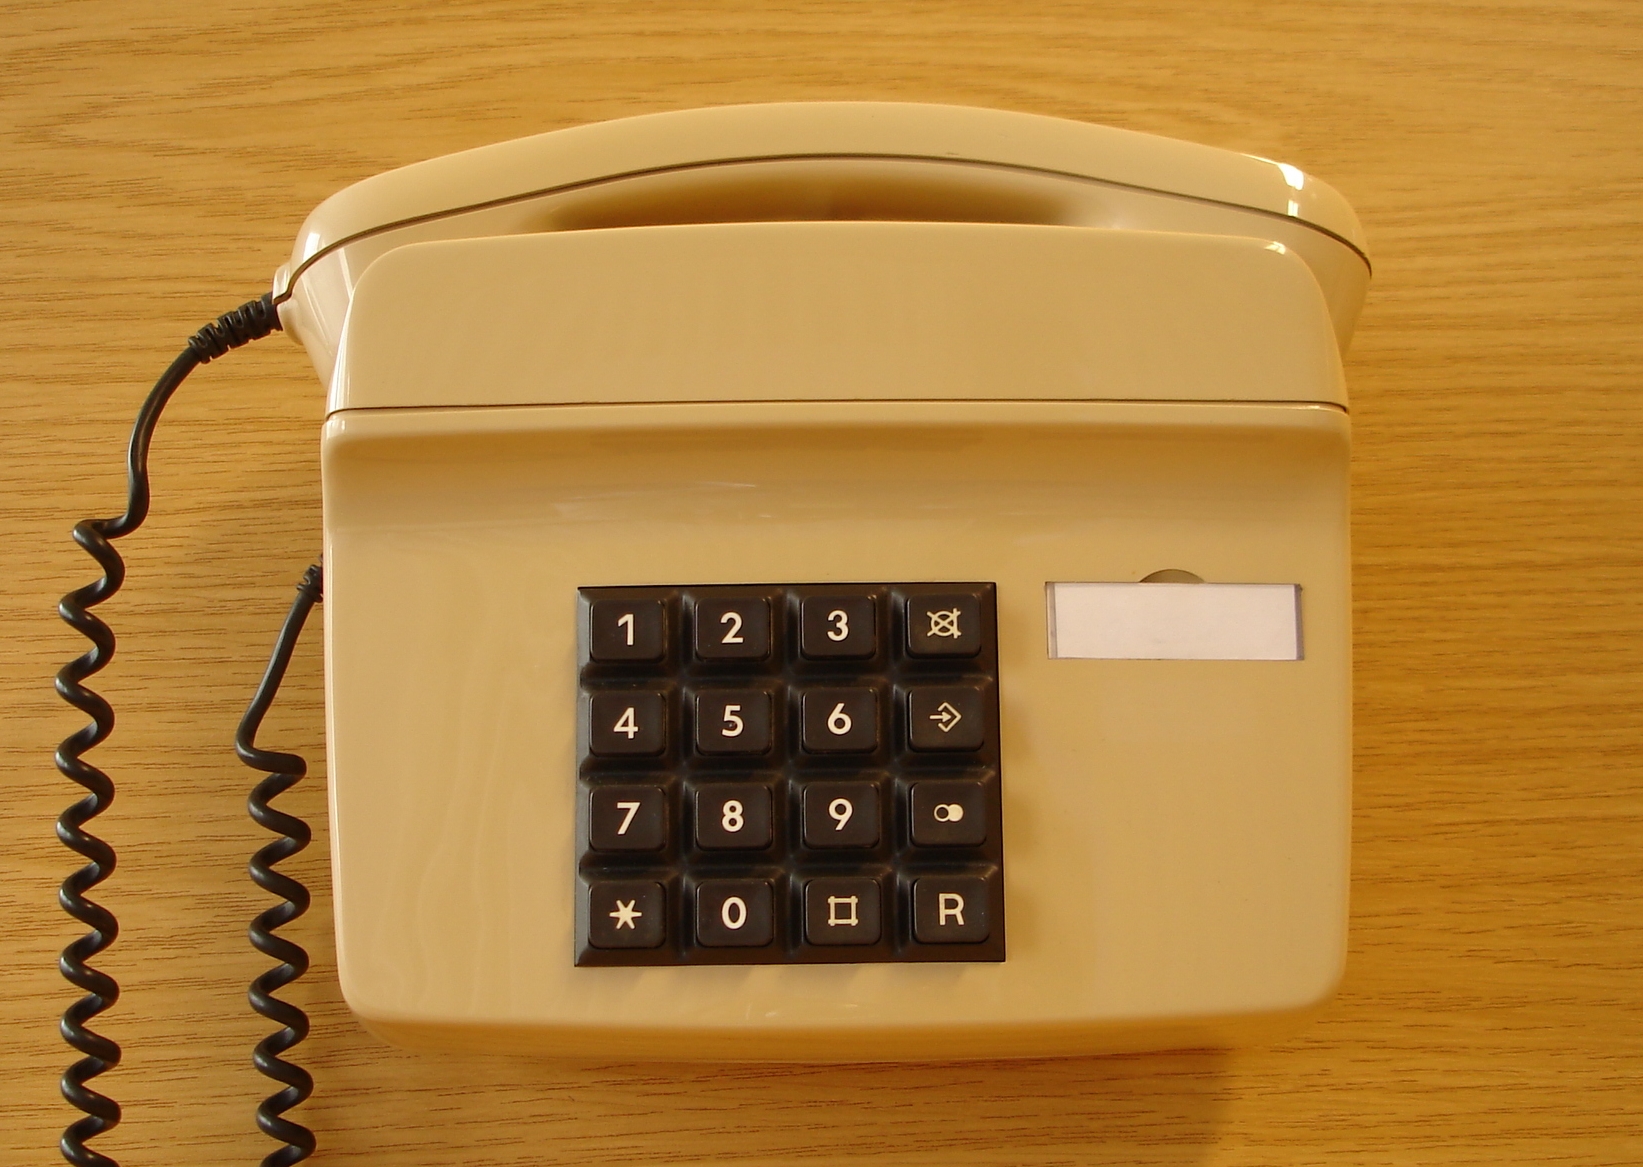 A beige and brown telephone.